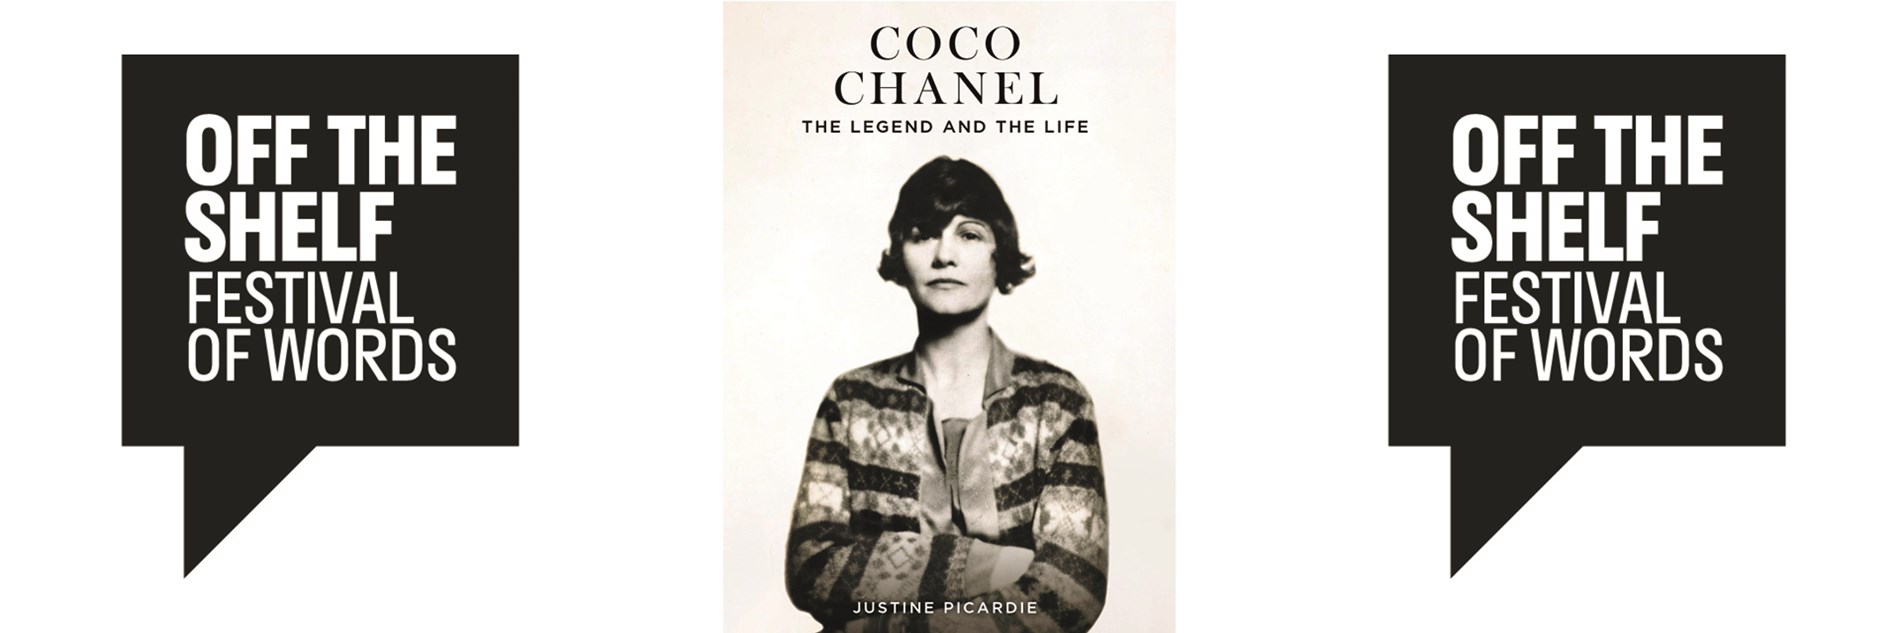 Coco Chanel, the Life and the Legend by Justine Picardie